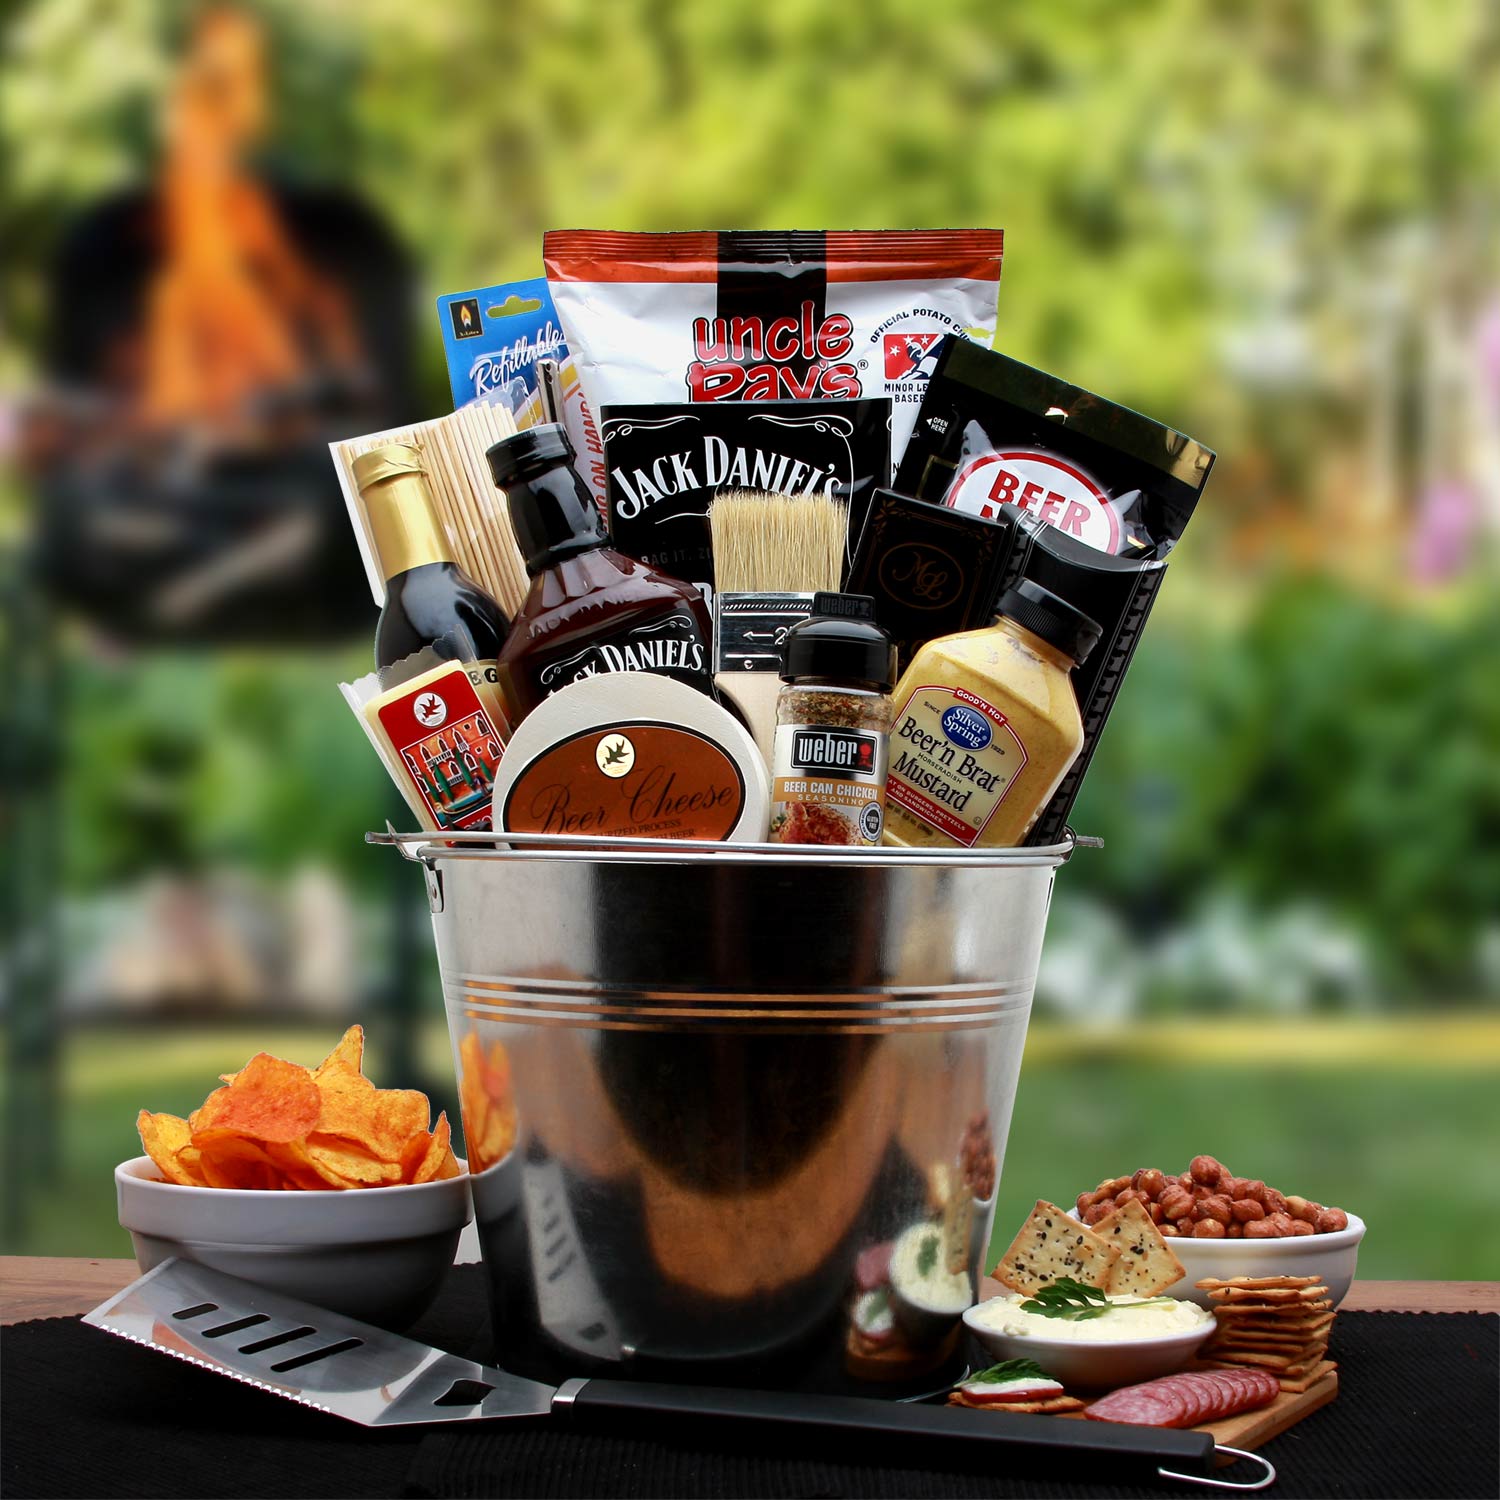 BBQ-Lovers-Gift-Pail